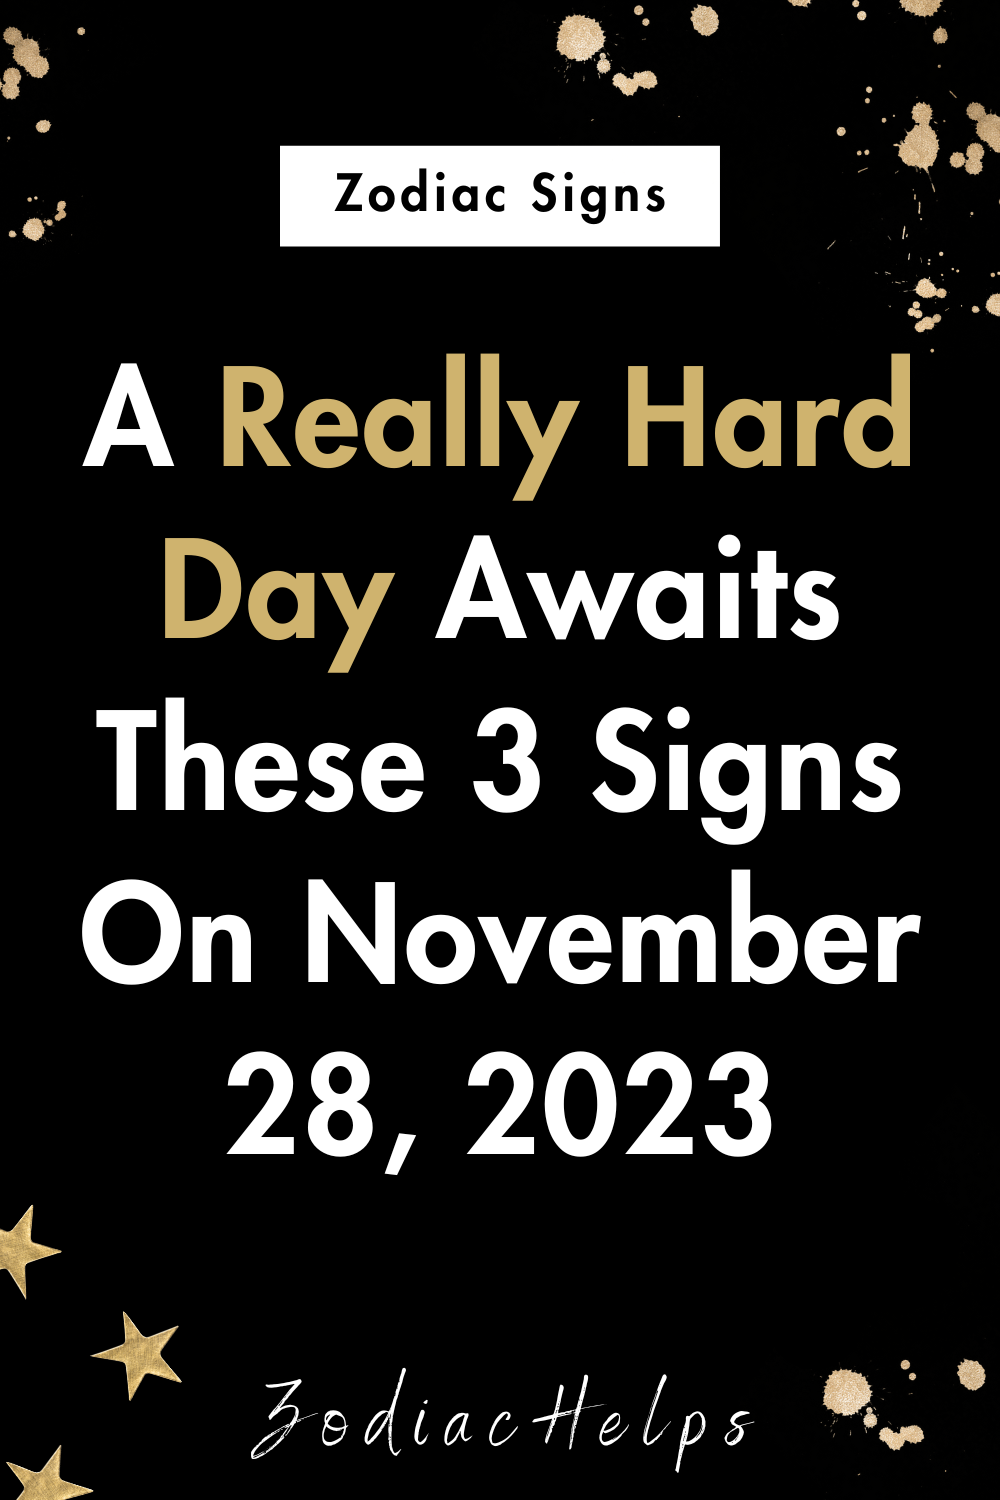 A Really Hard Day Awaits These 3 Signs On November 28, 2023